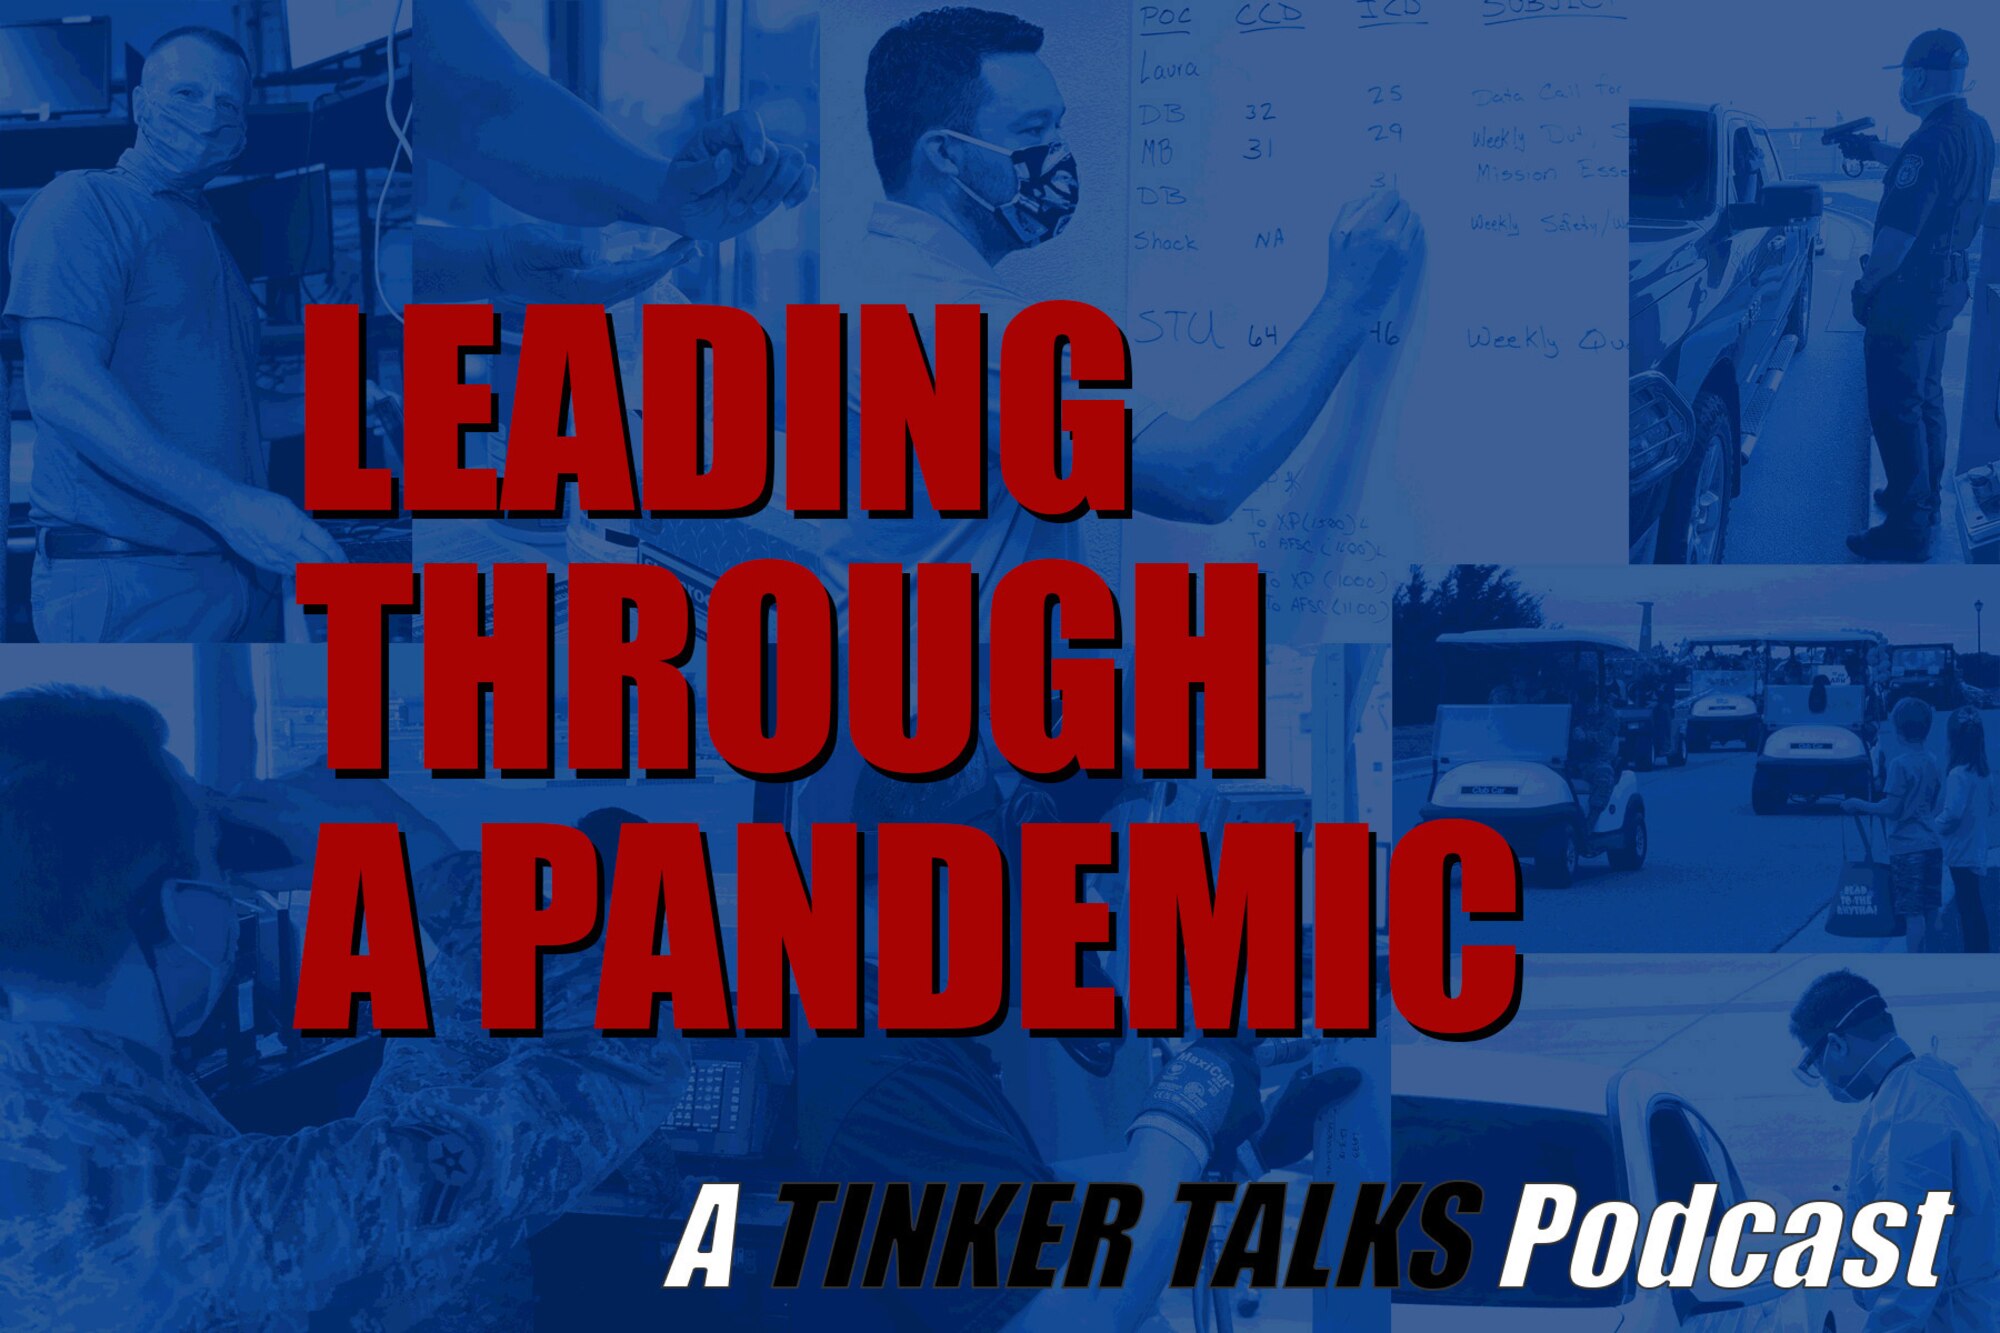 A podcast dedicated to the latest events and happenings on one of the largest Air Force bases, “Tinker Talks” features various perspectives from the 5,600-acre installation. Captured by the 72nd Air Base Wing Public Affairs Office, this podcast shares stories, updates and insights on Tinker Air Force Base.